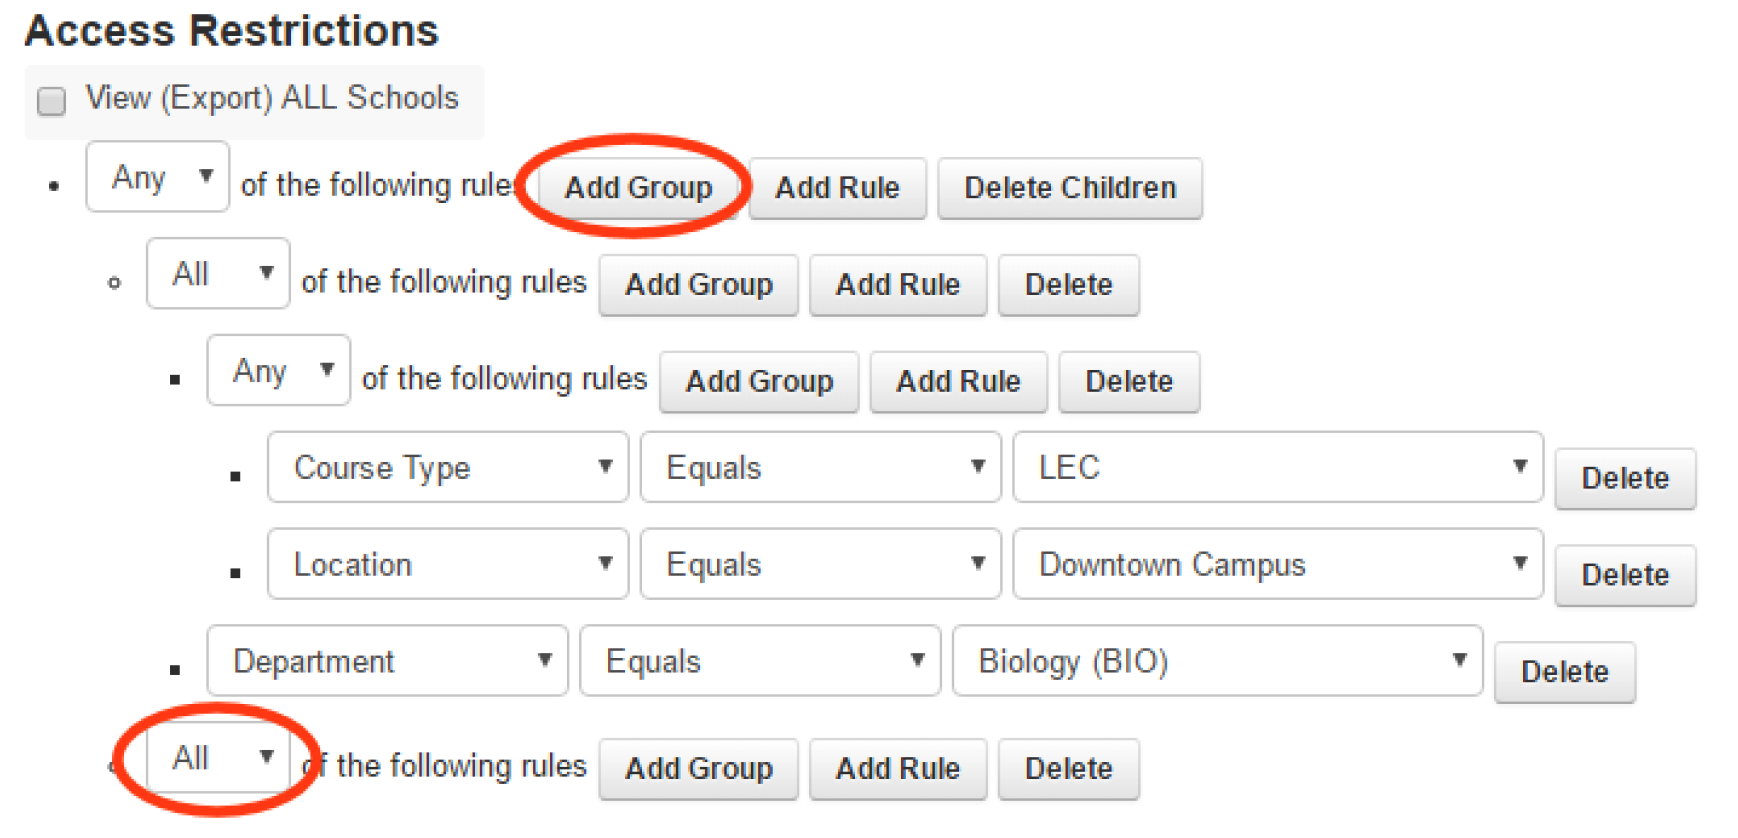 Add group button. Any dropdown selection.